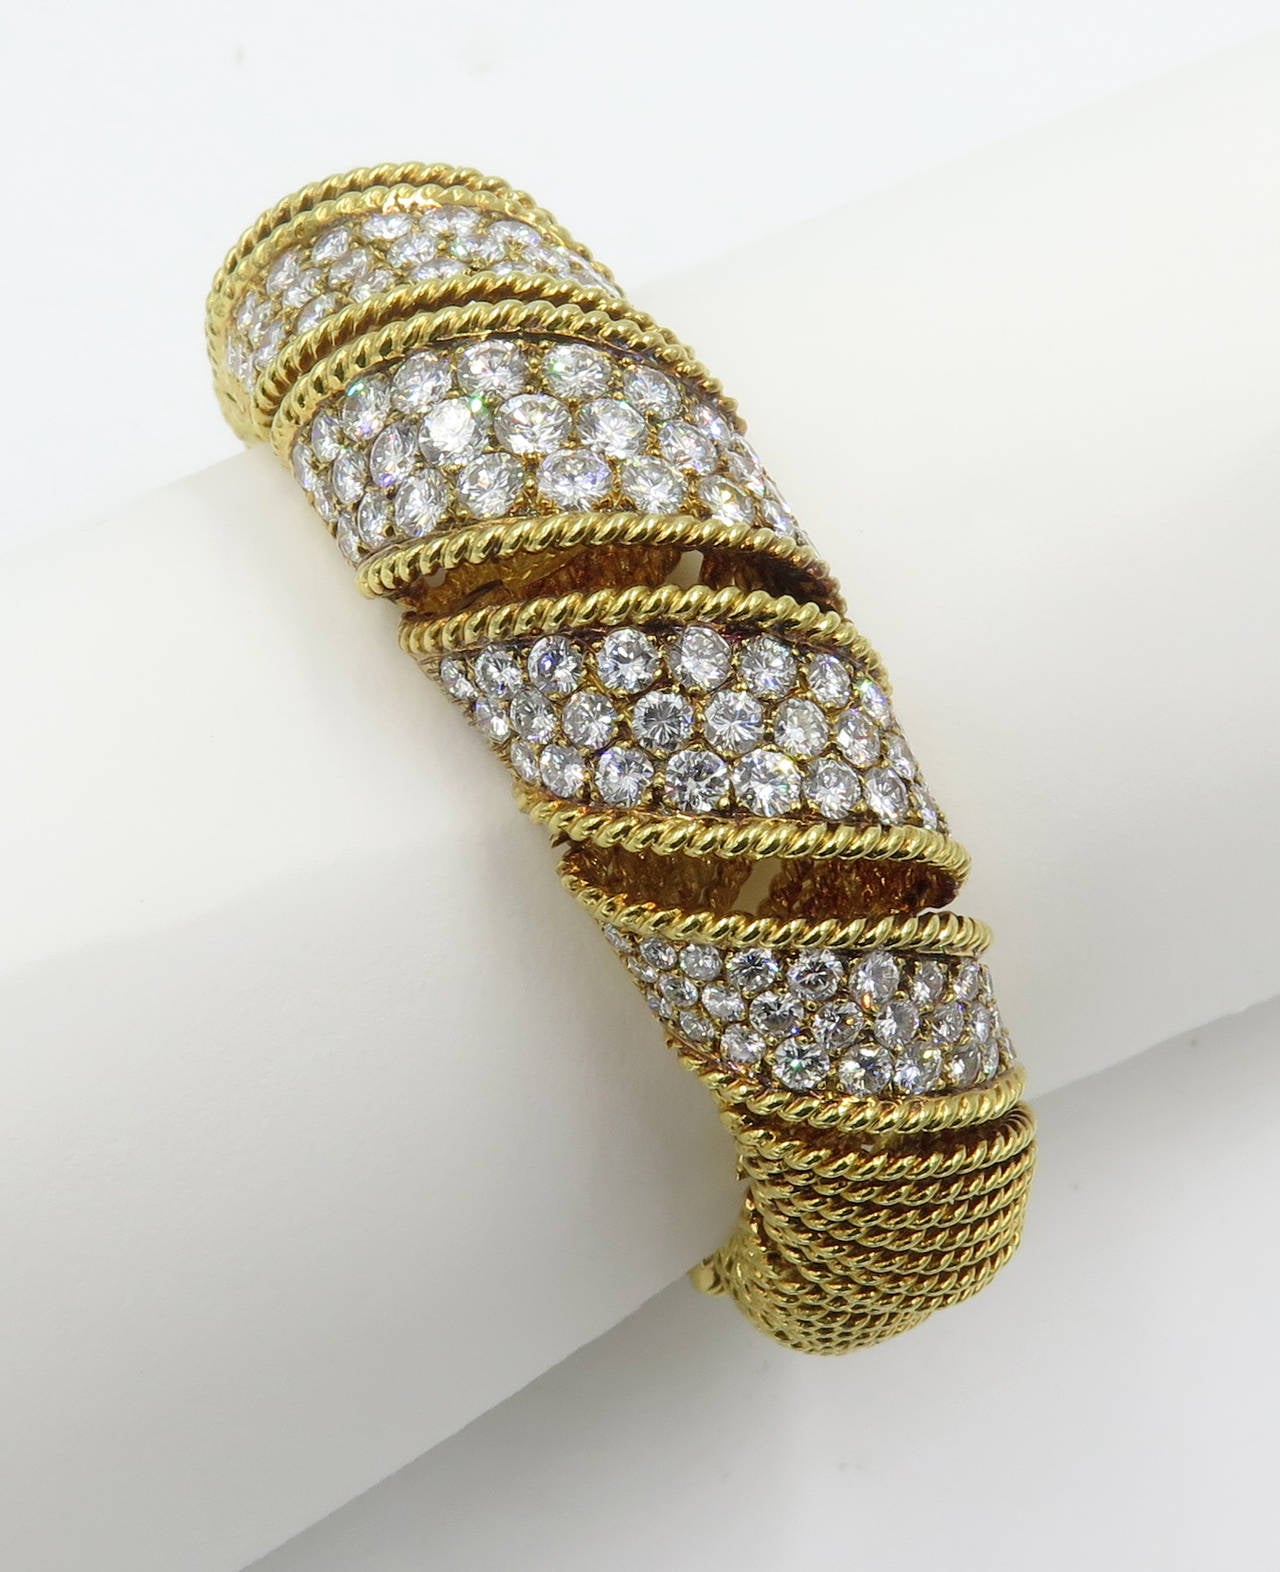 An 18 karat yellow gold and diamond bracelet, Signed Modele Sterle Paris 18K © montreaux, Circa 1960s.  The bracelet is designed as  graduated sections of spiraling gold rope, the 5 graduated center sections set with a total of 141 round brilliant